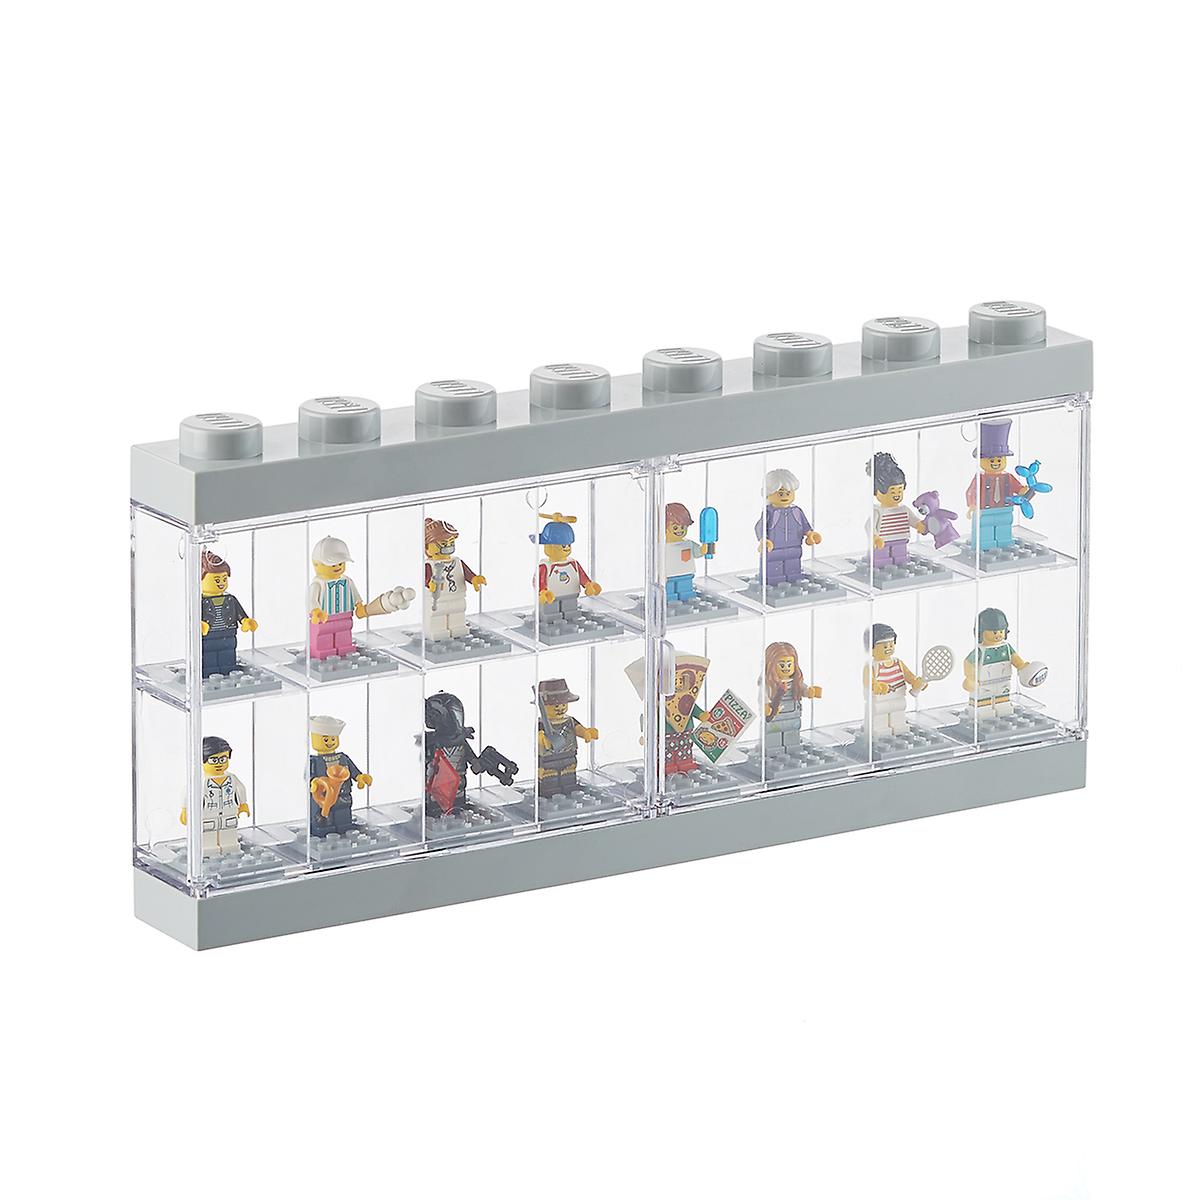 Verrassend Lego Large Minifigure Display Case | The Container Store KZ-83